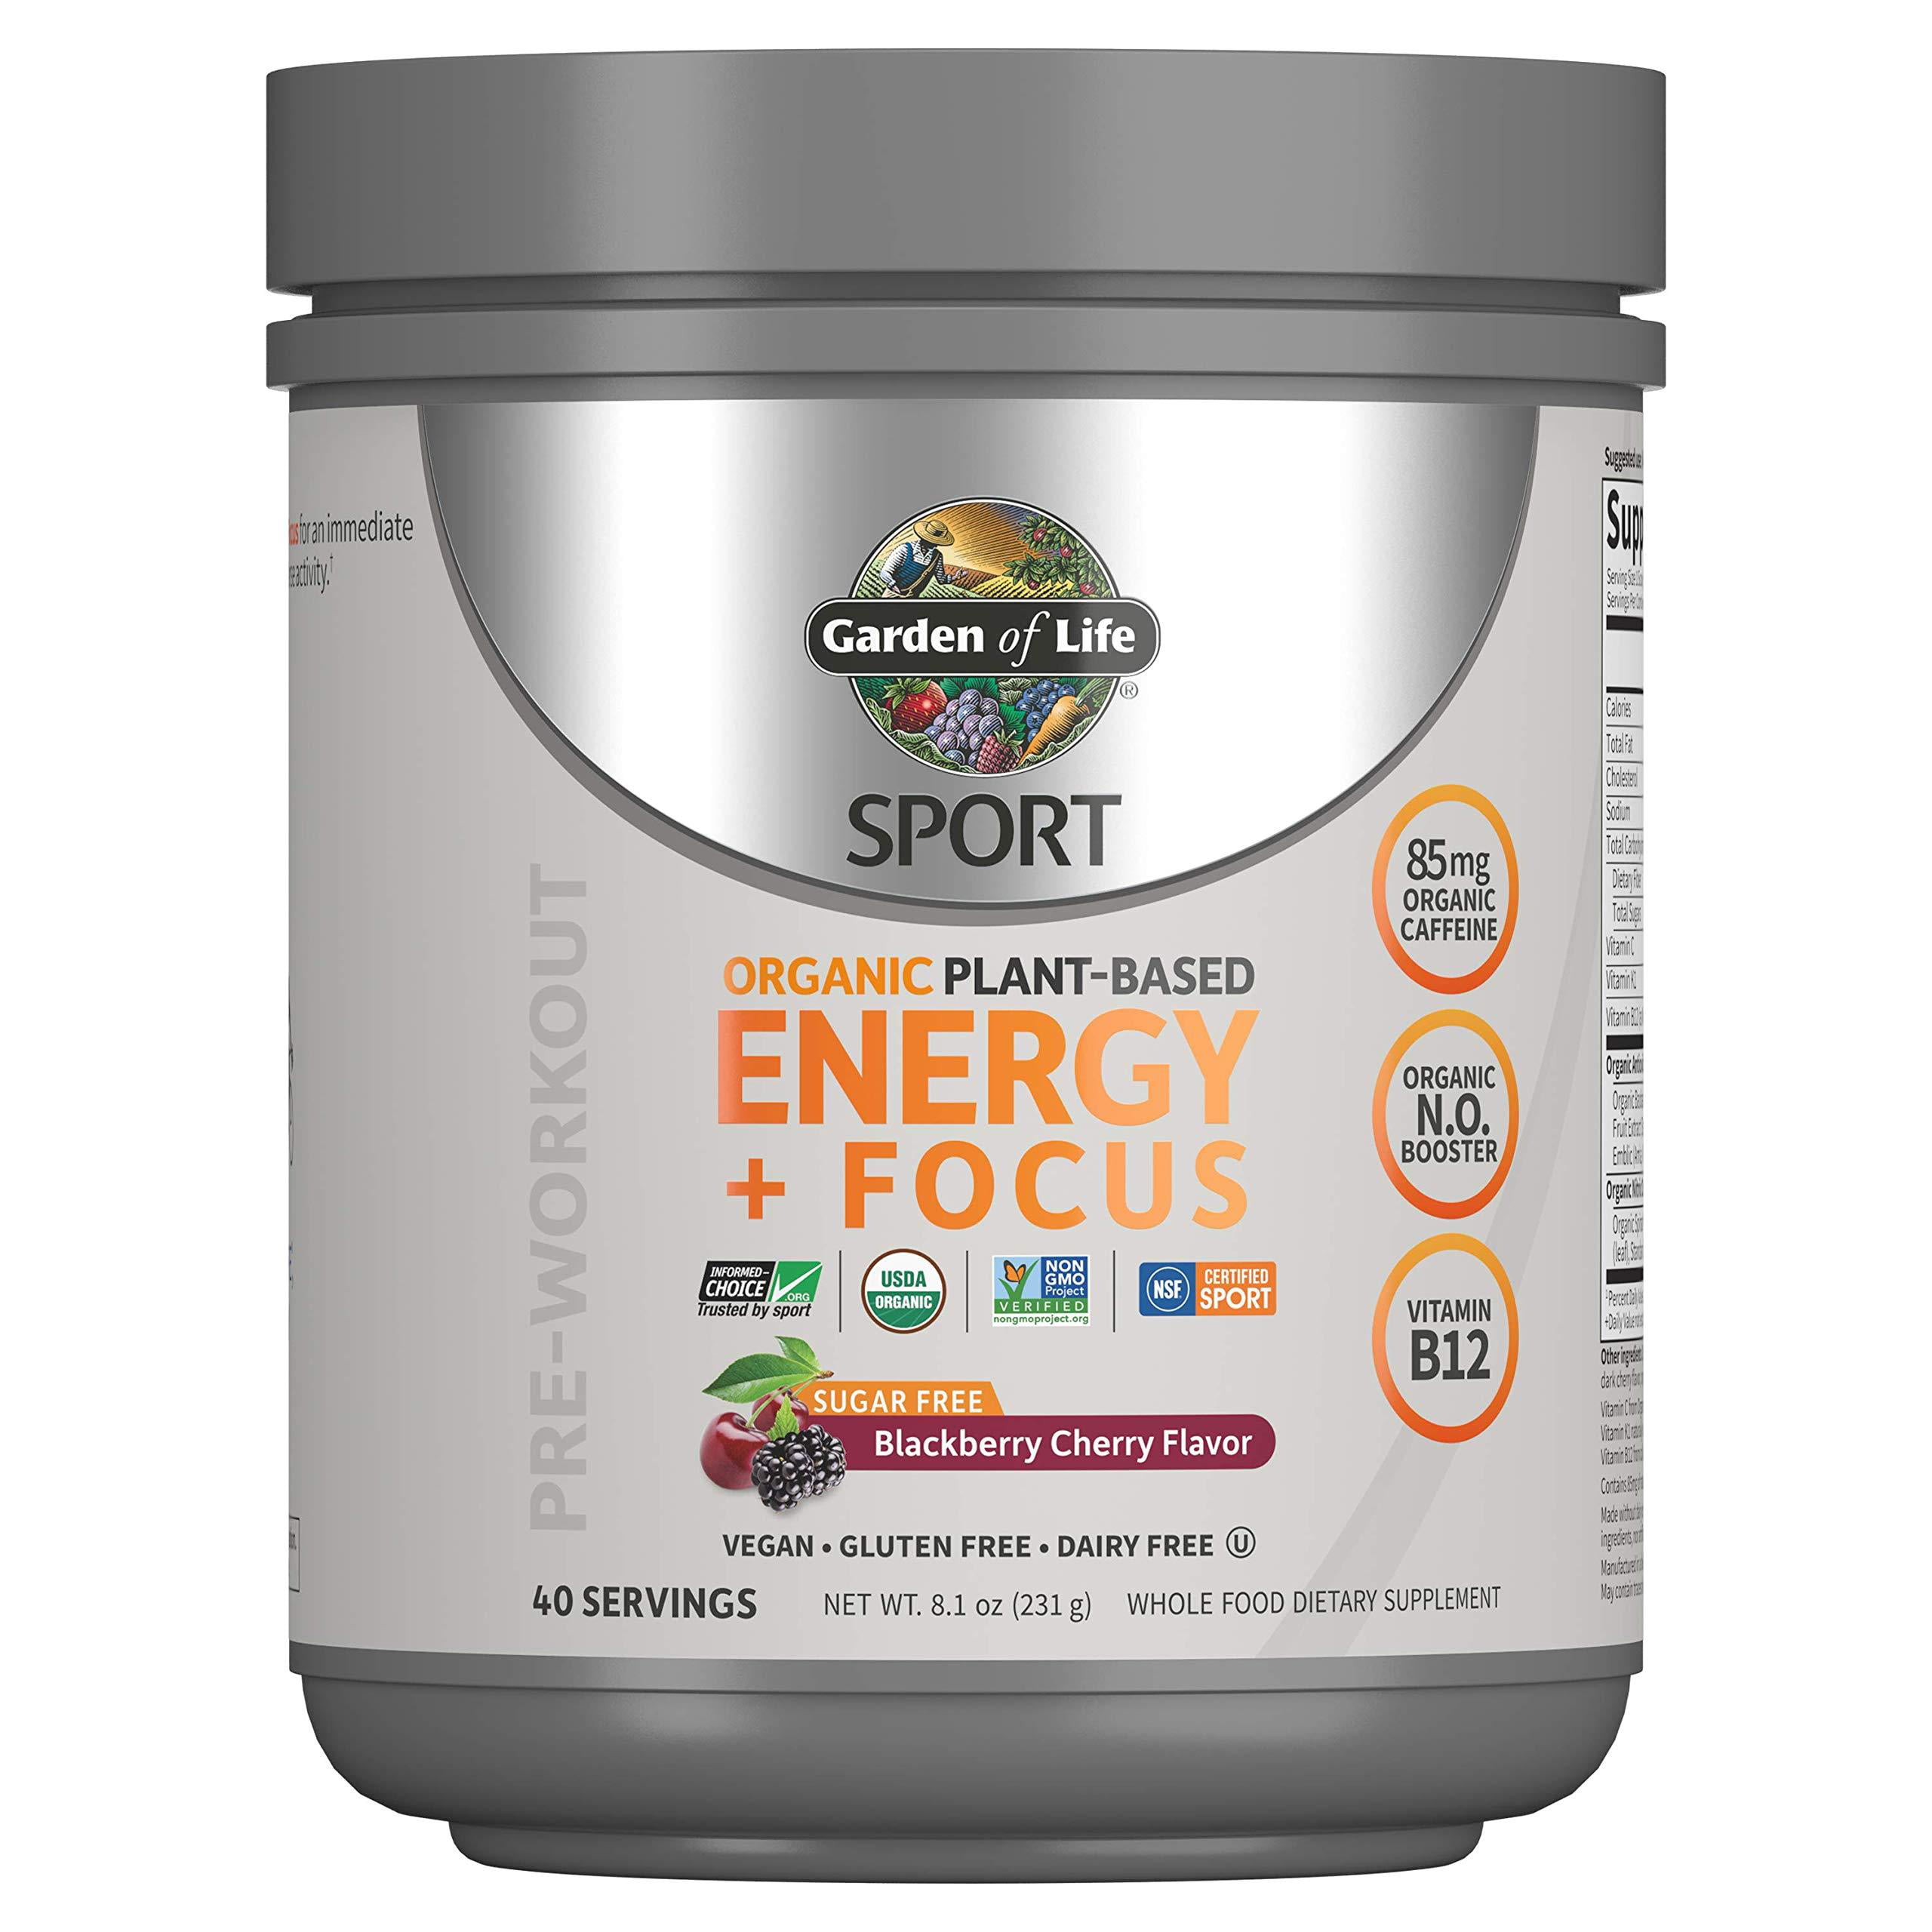 Garden of Life Sport Organic Plant-Based Energy + Focus Vegan Clean Pre Workout Powder, Sugar & Gluten Free BlackBerry Cherry with 85mg Caffeine, Natural NO Booster, B12, 40 Servings, 8.14 Oz